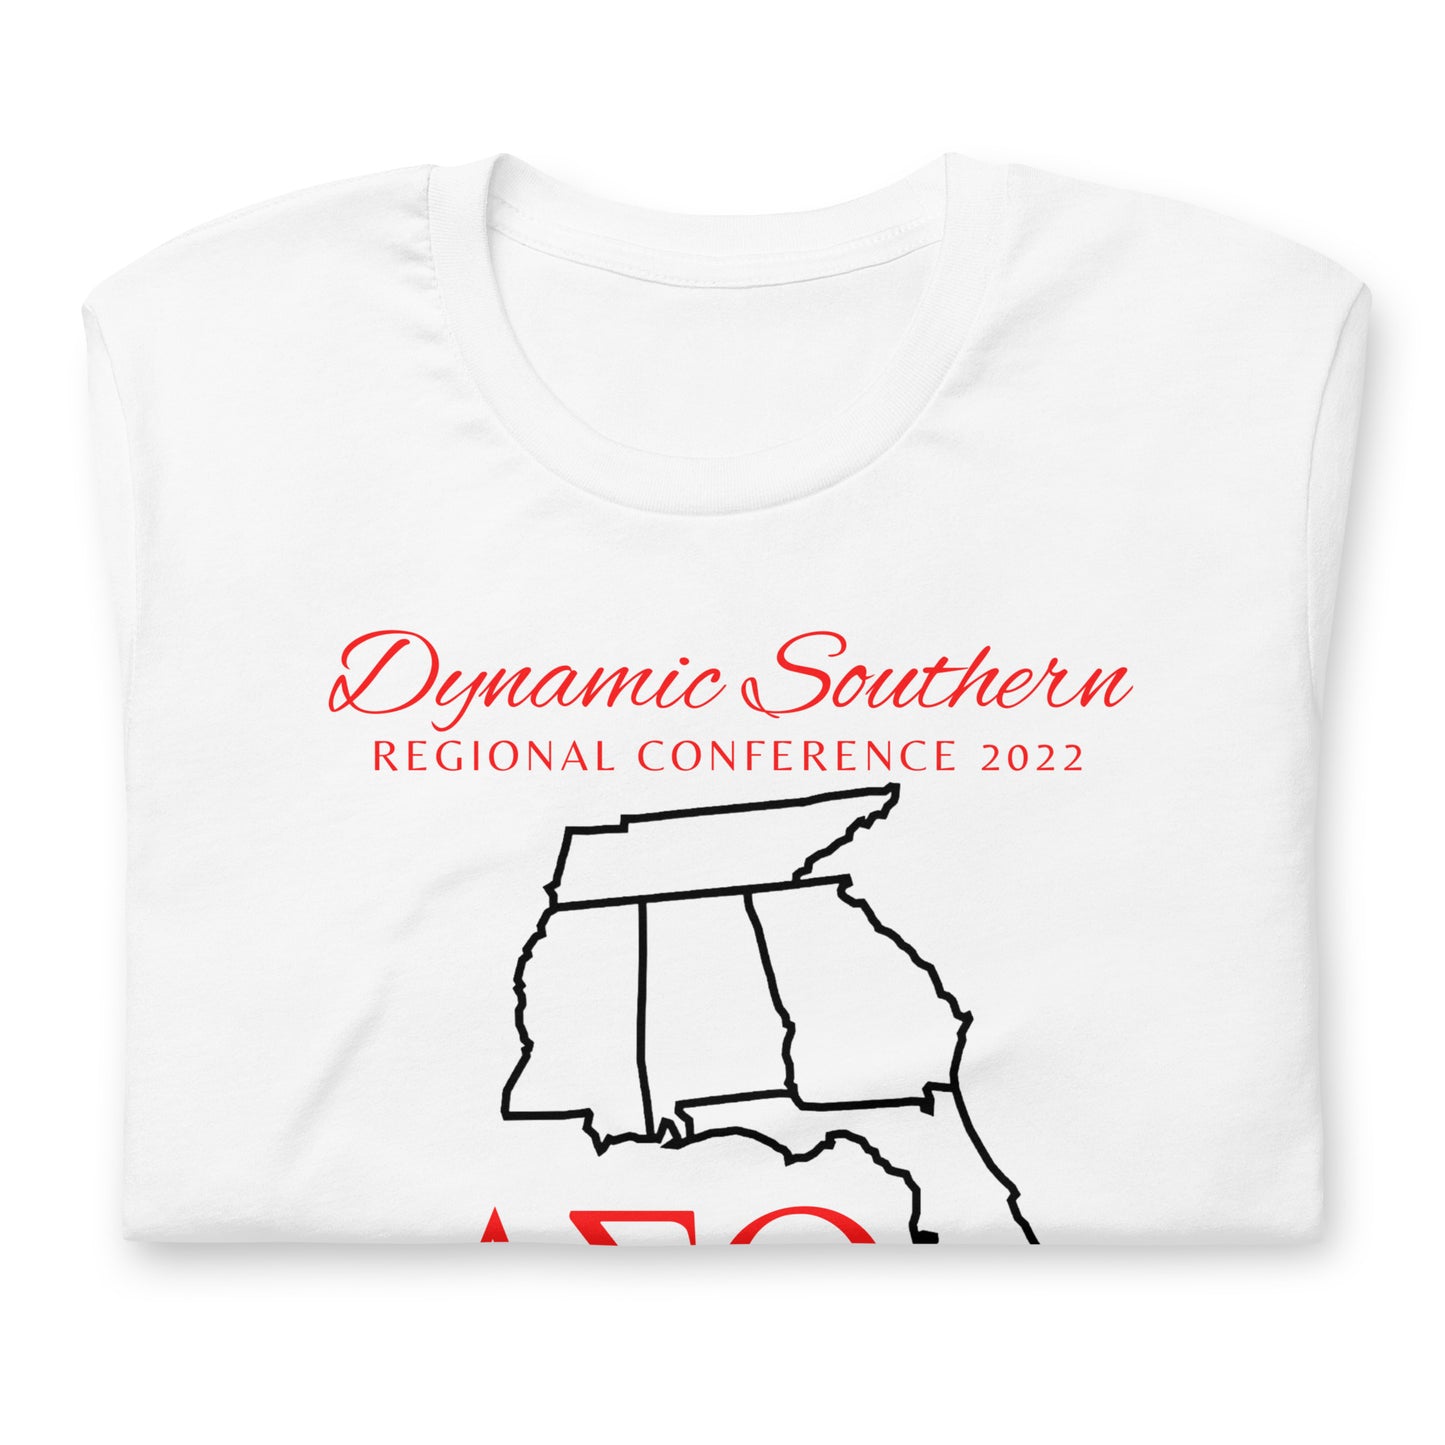 Southern 2022 Regional Conference T-Shirt